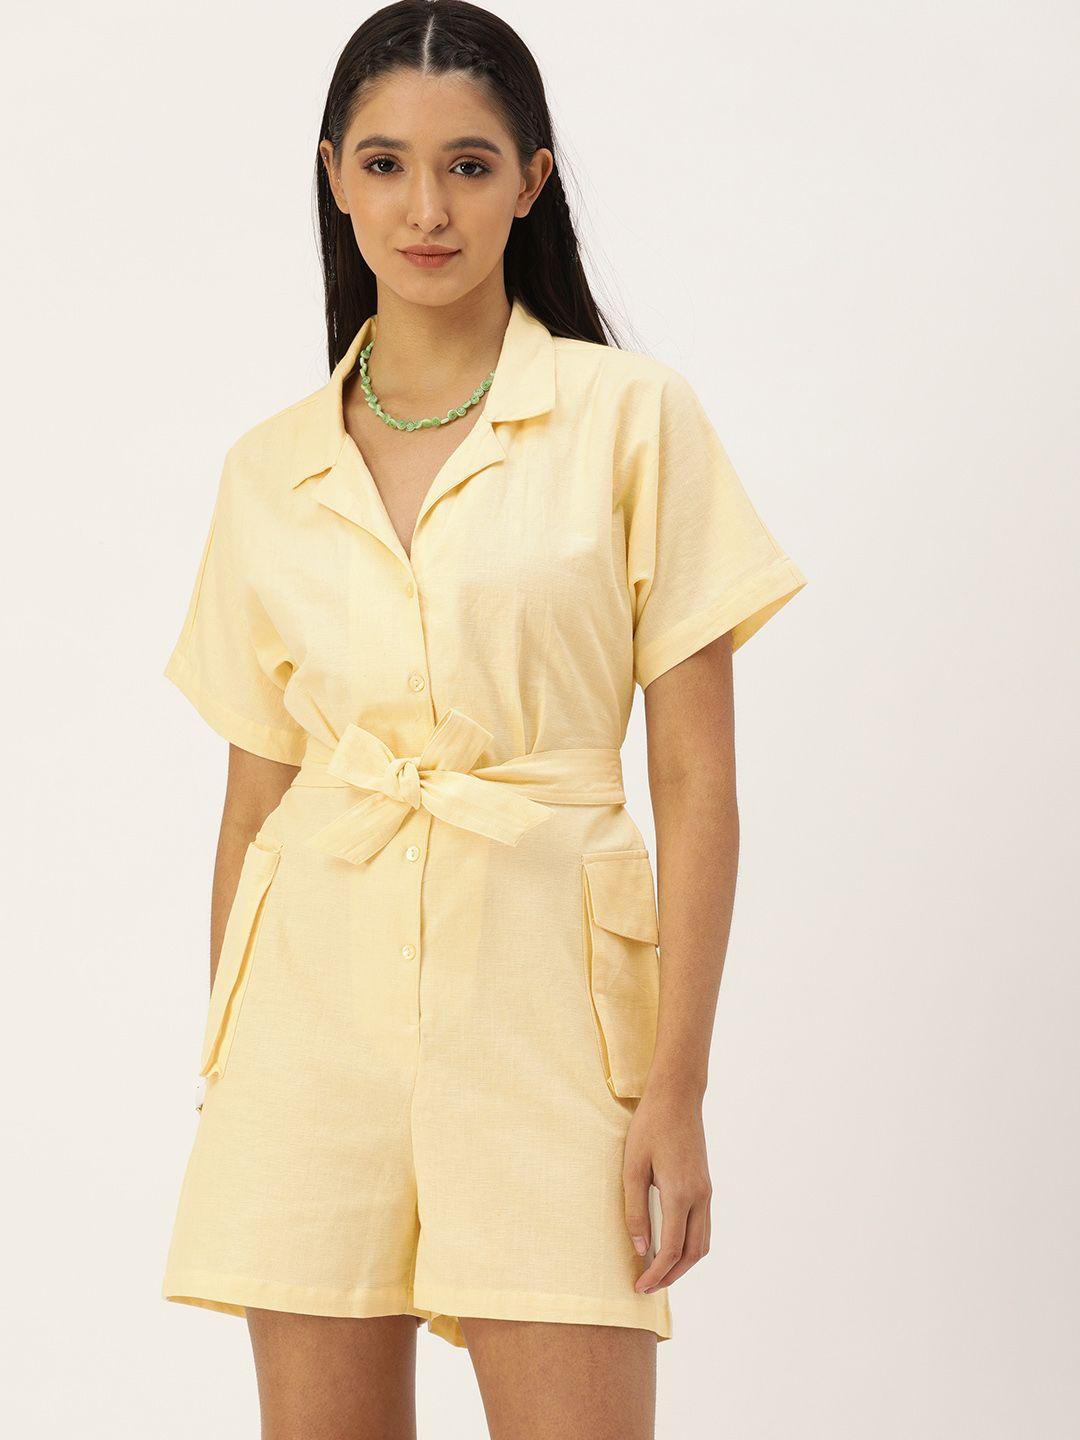 forever-21-yellow-waist-tie-up-notched-lapel-styled-back-playsuit